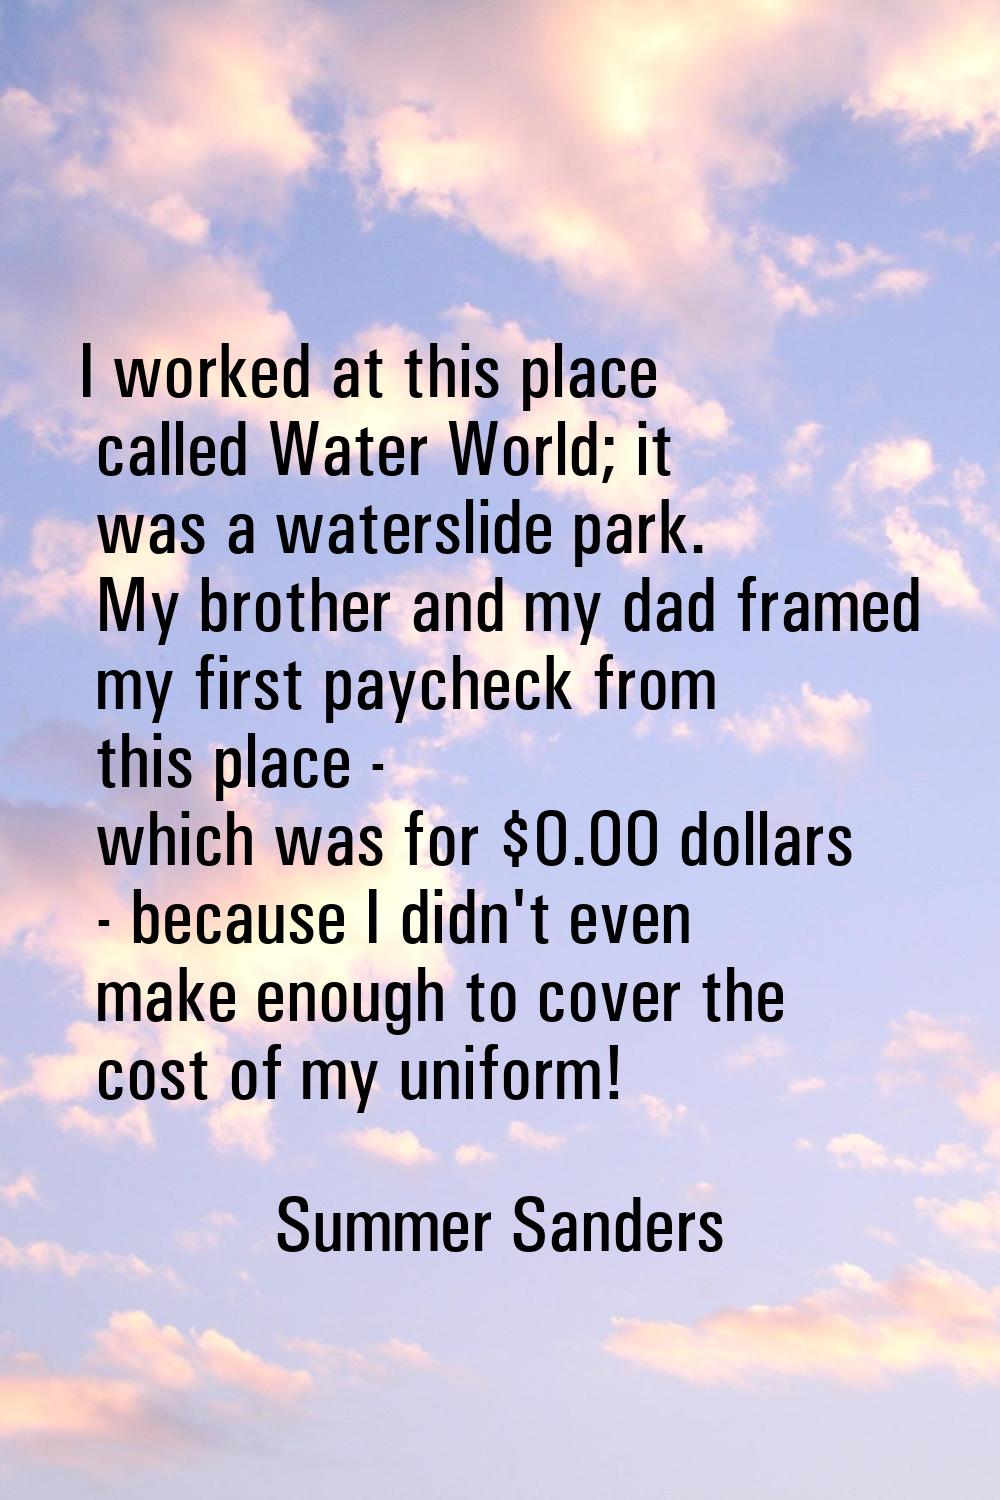 I worked at this place called Water World; it was a waterslide park. My brother and my dad framed m